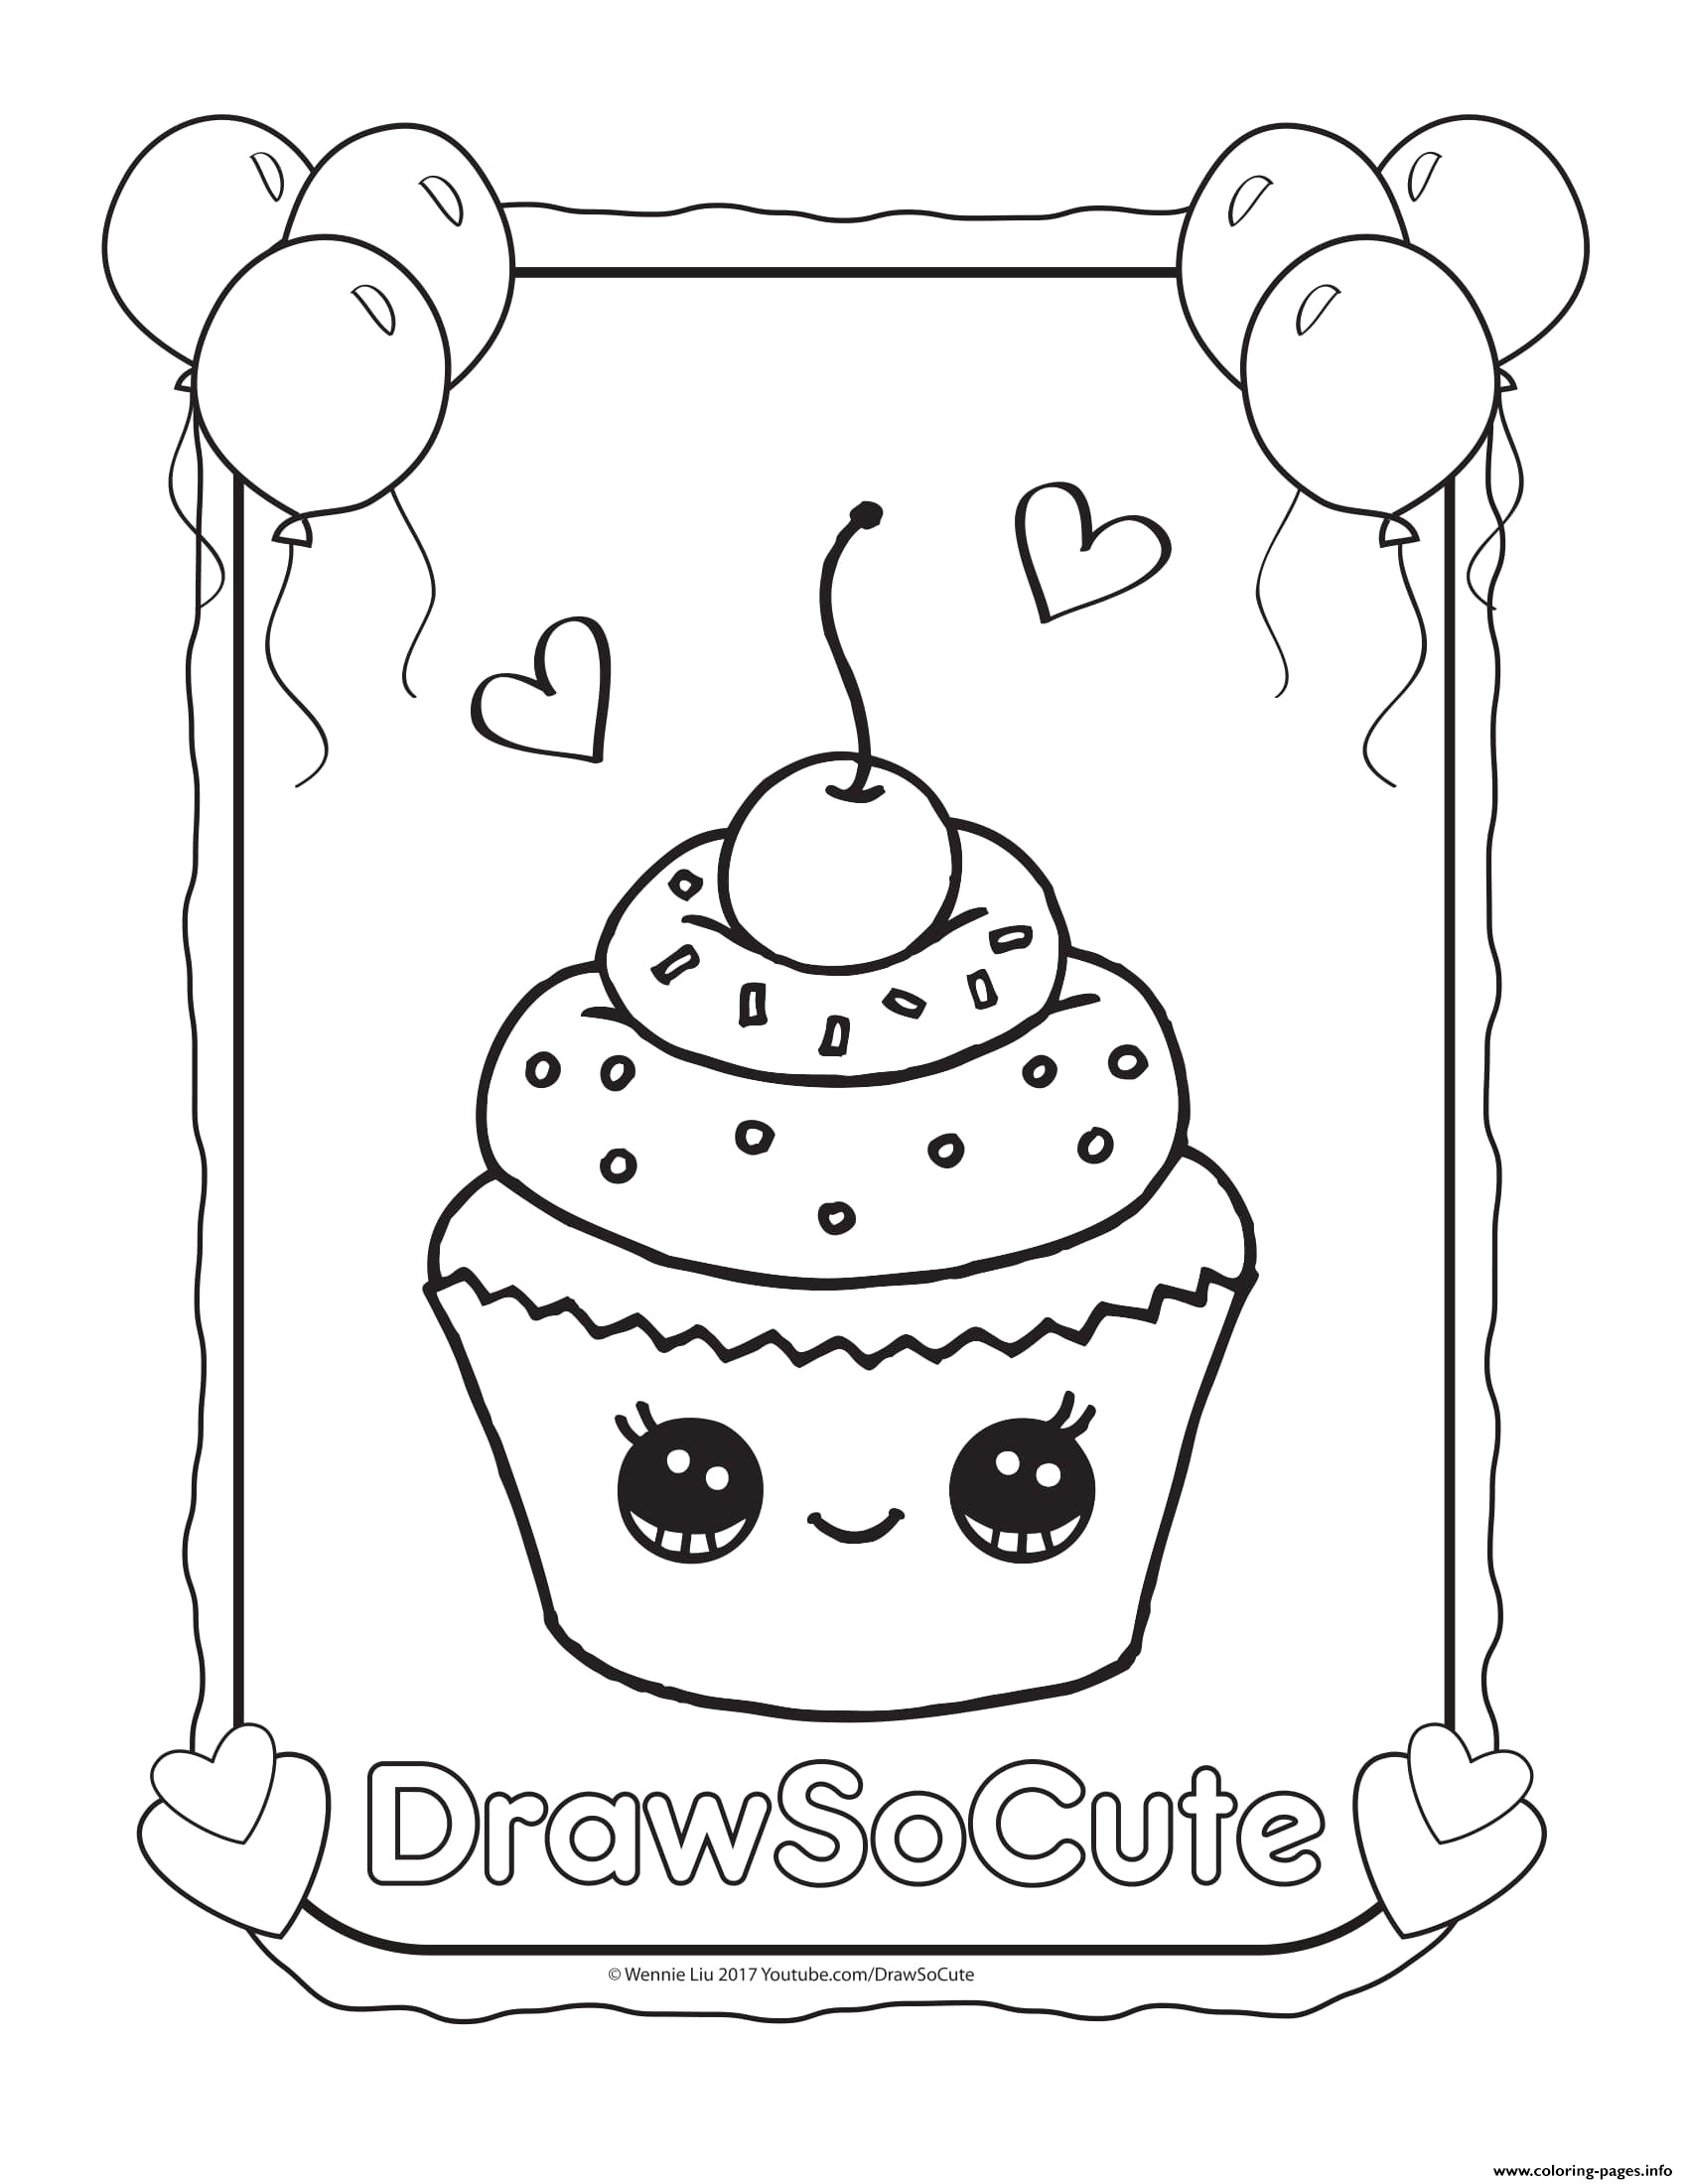 Printable Drawings at Explore collection of